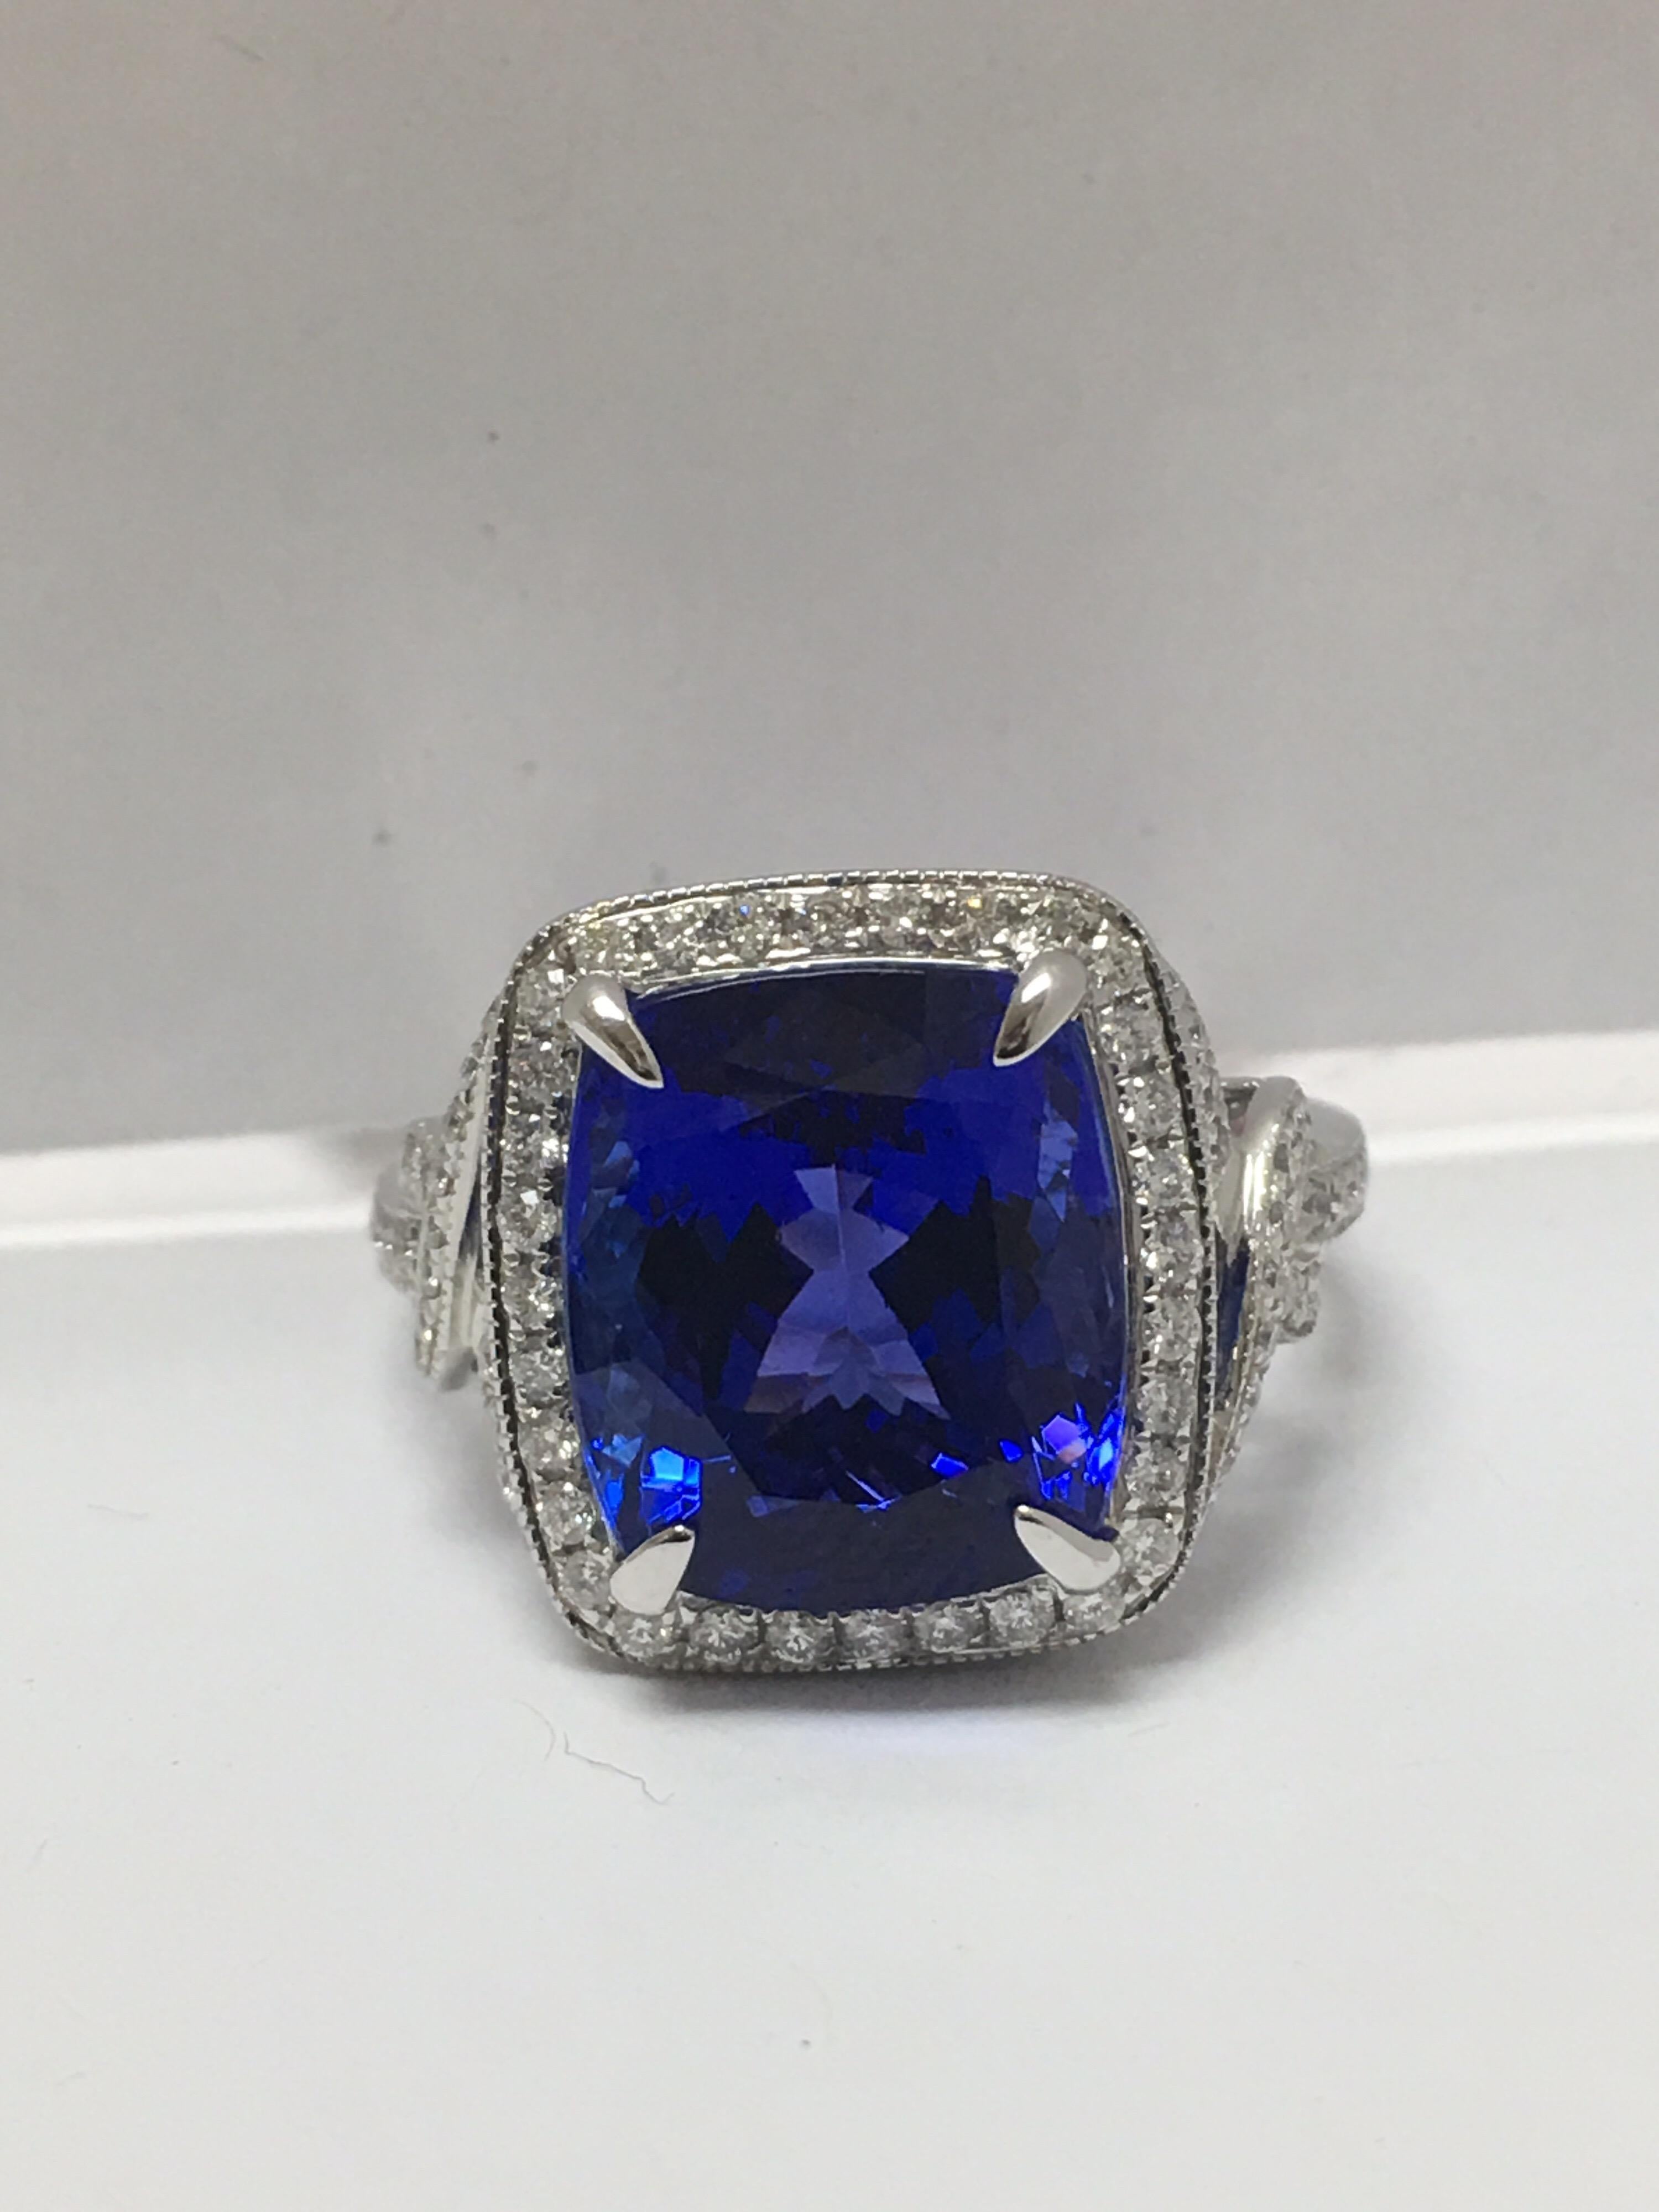 Natural cushion cut Tanzanite 8.34 Carat and 0.51 Carat round white  Diamond Set In 14 Karat gold. The ring is handcrafted and one of a kind. This is AJI Certified and size is 7 if needed the ring can be resized.